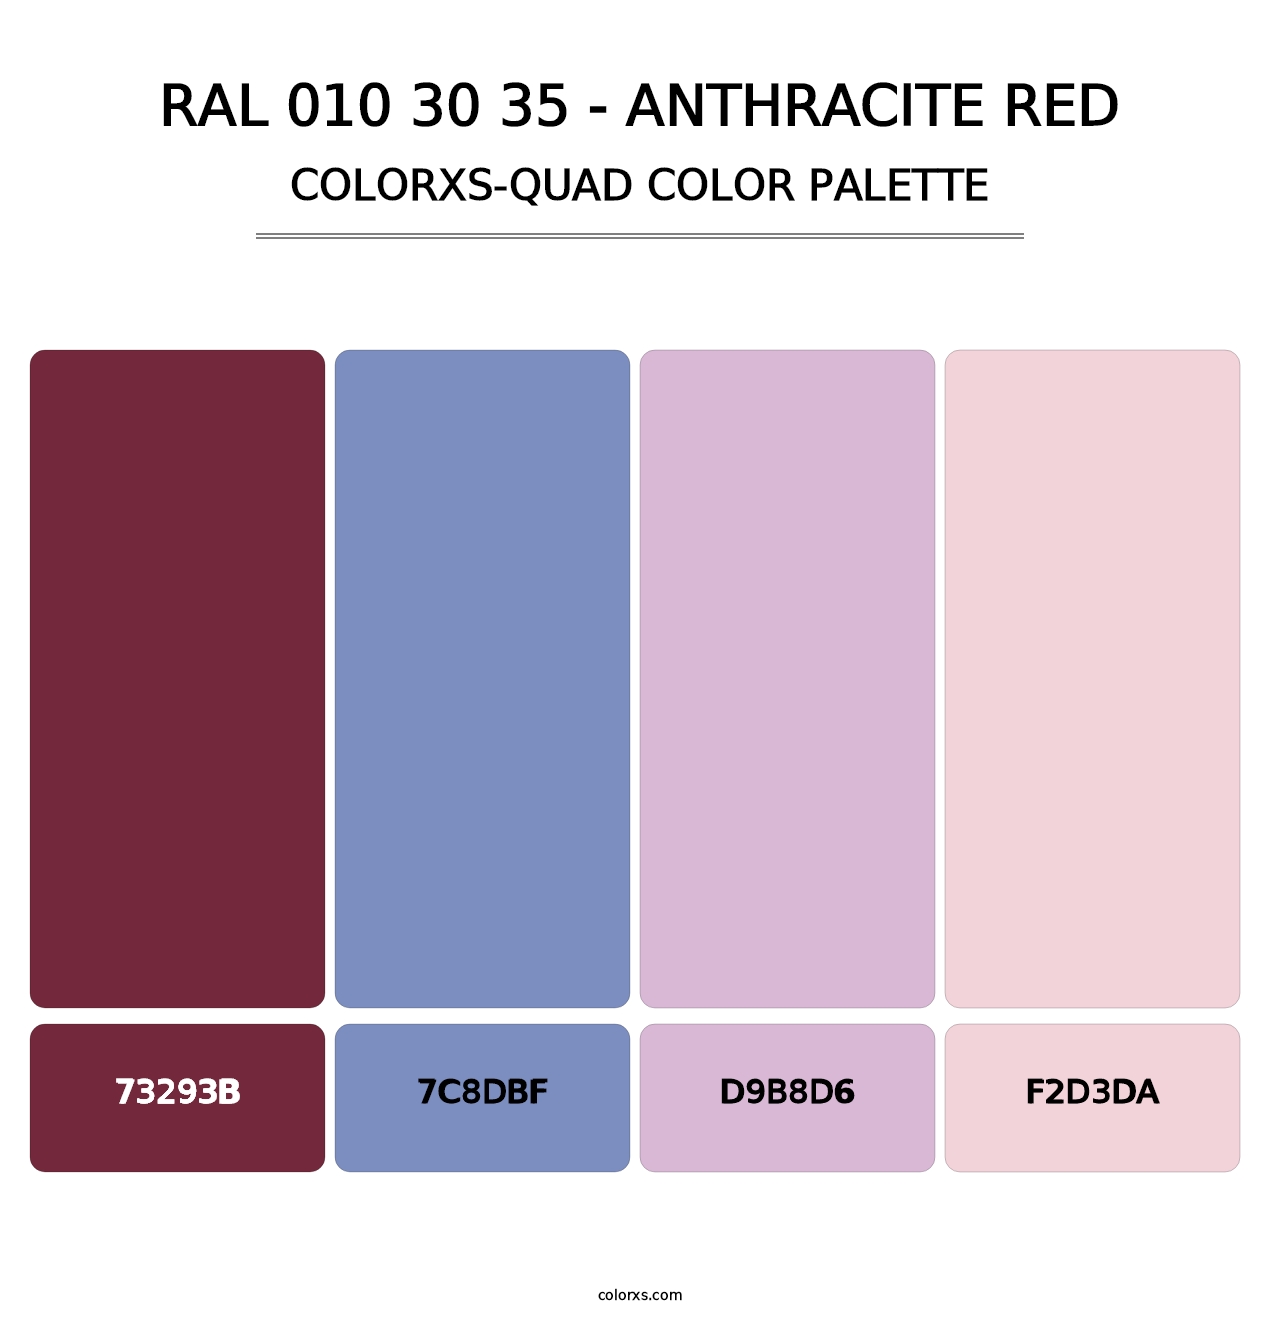 RAL 010 30 35 - Anthracite Red - Colorxs Quad Palette